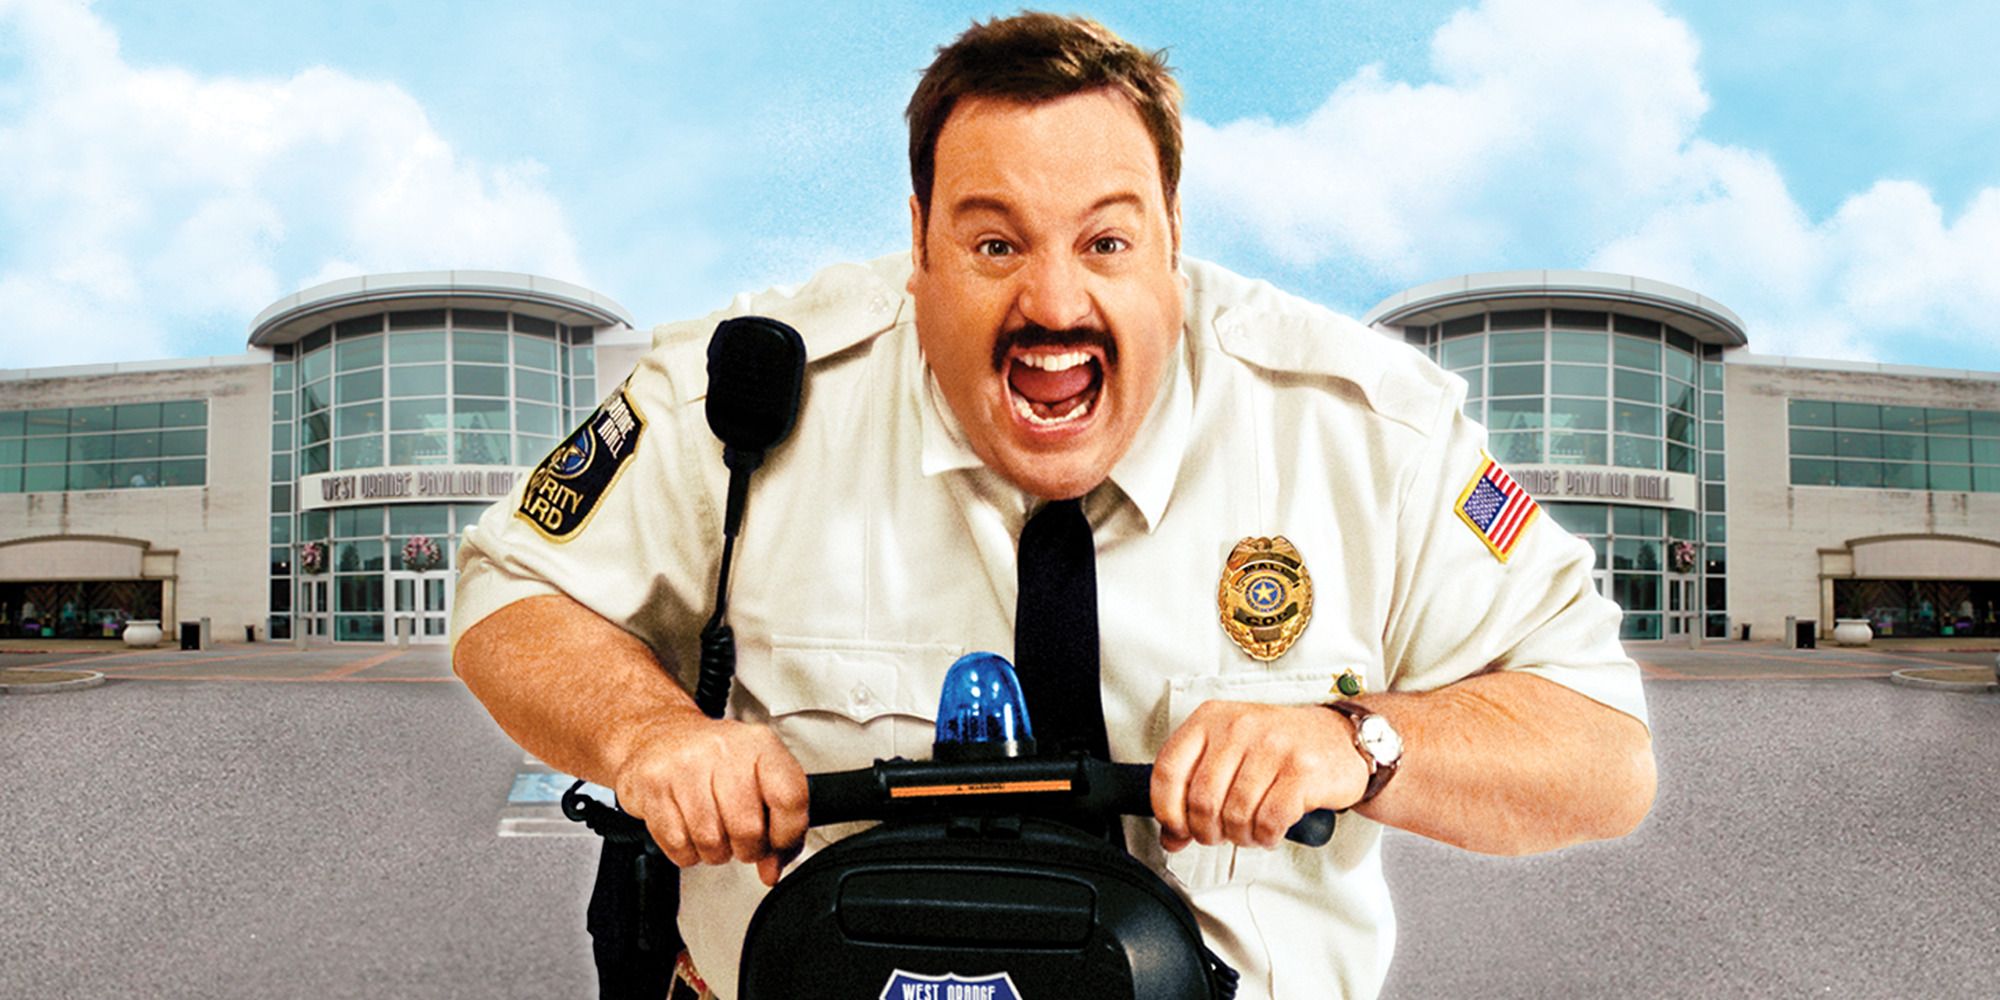 Paul Blart screaming while driving his Segway outside a mall